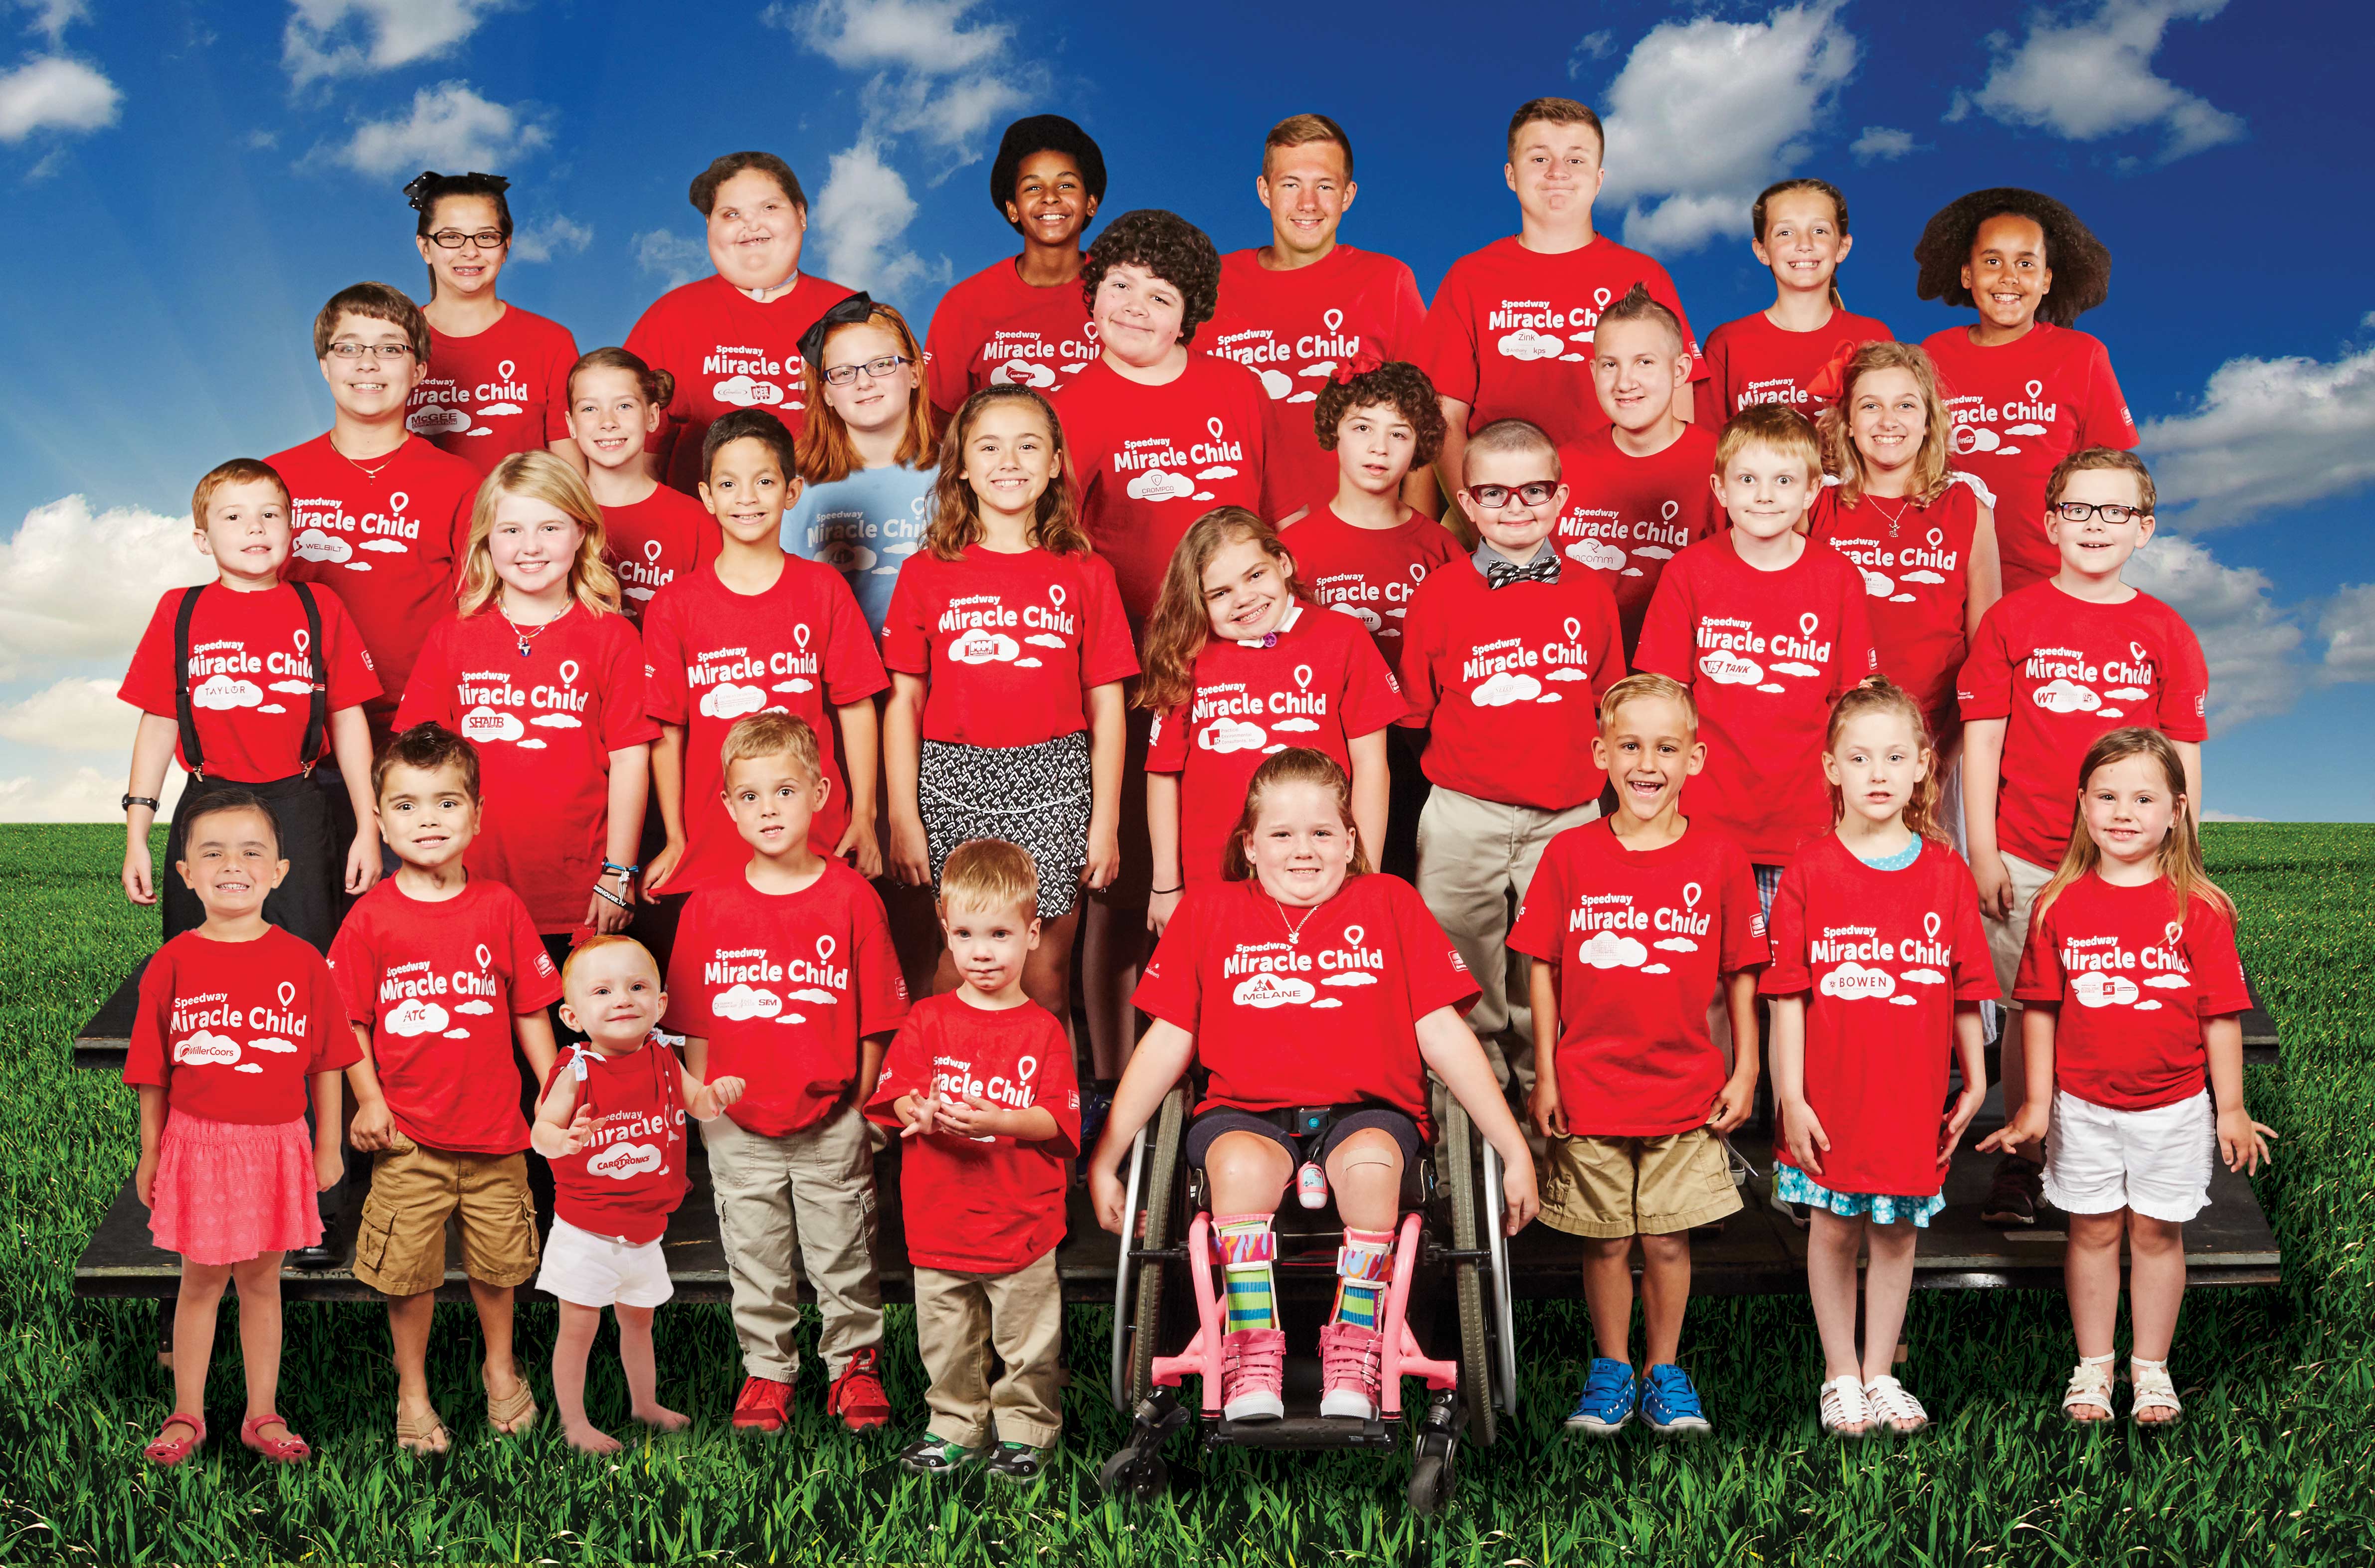 These 31 Speedway Miracle Children represent all those who benefit from donations to their CMN member hospitals